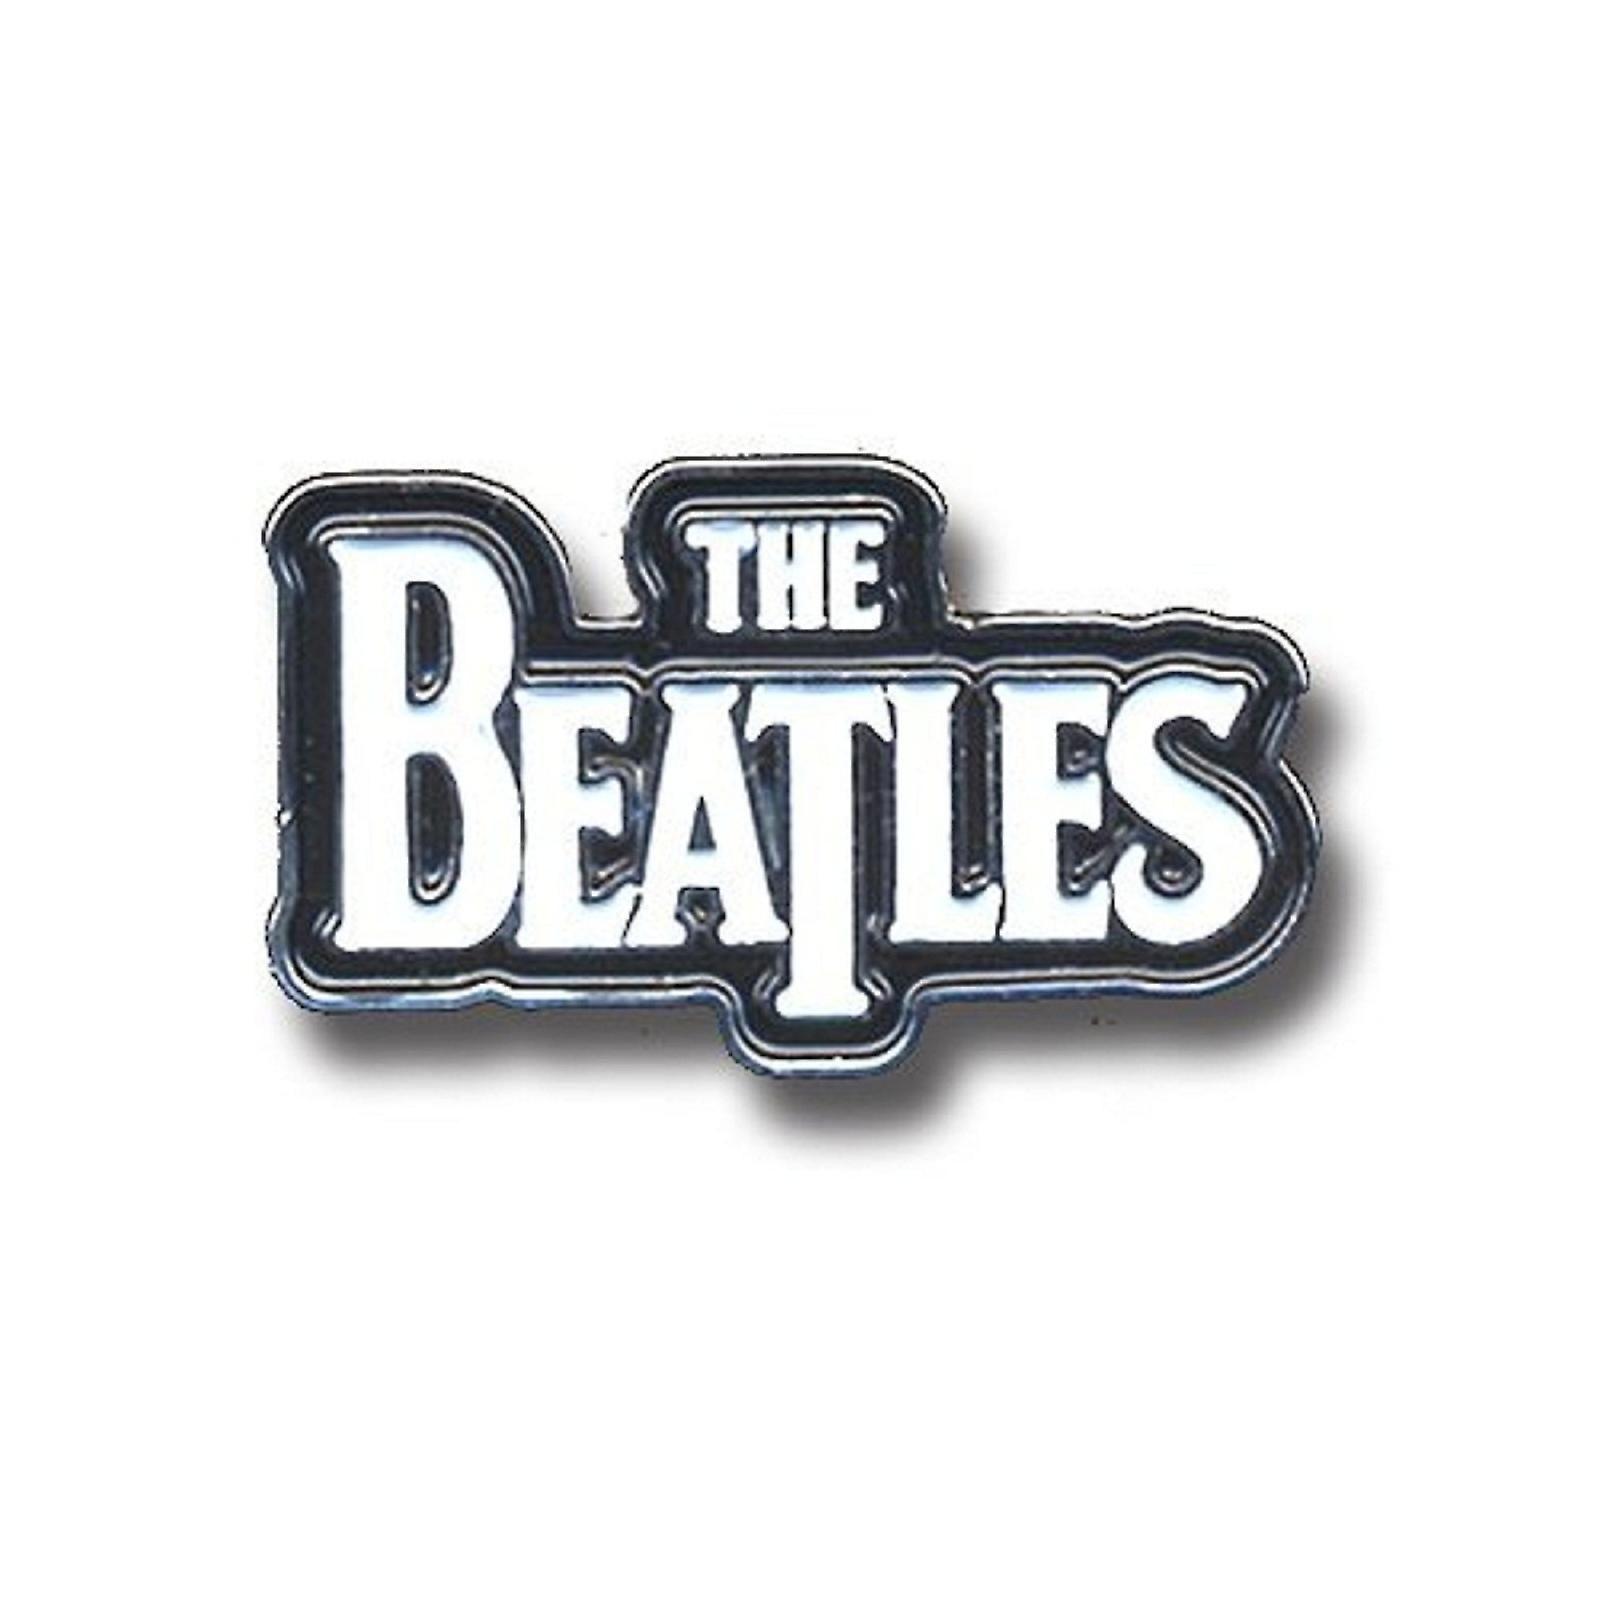 The Beatles Band Logo - The Beatles Badge white Drop T classic Band Logo new Official Metal ...